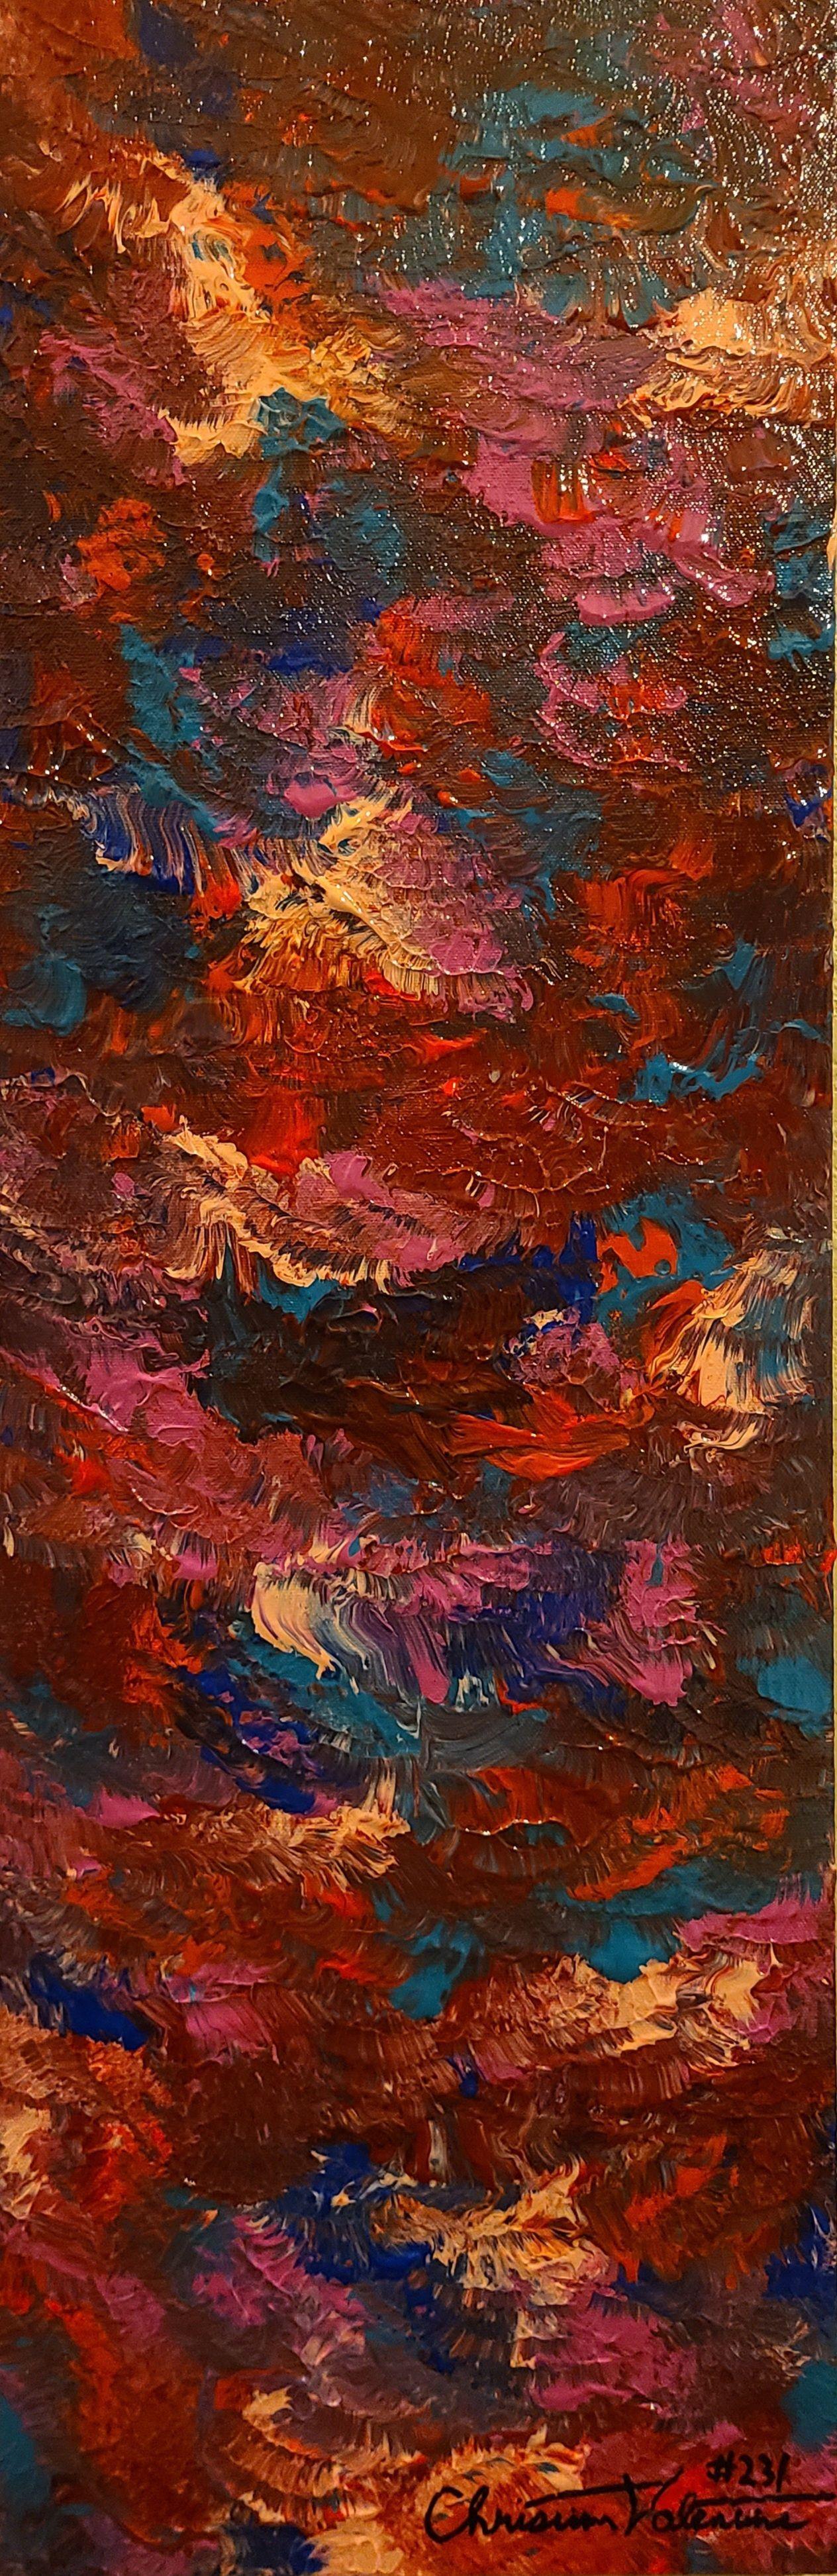 Christian Valentine Abstract Painting - Fingernails, Painting, Acrylic on Canvas